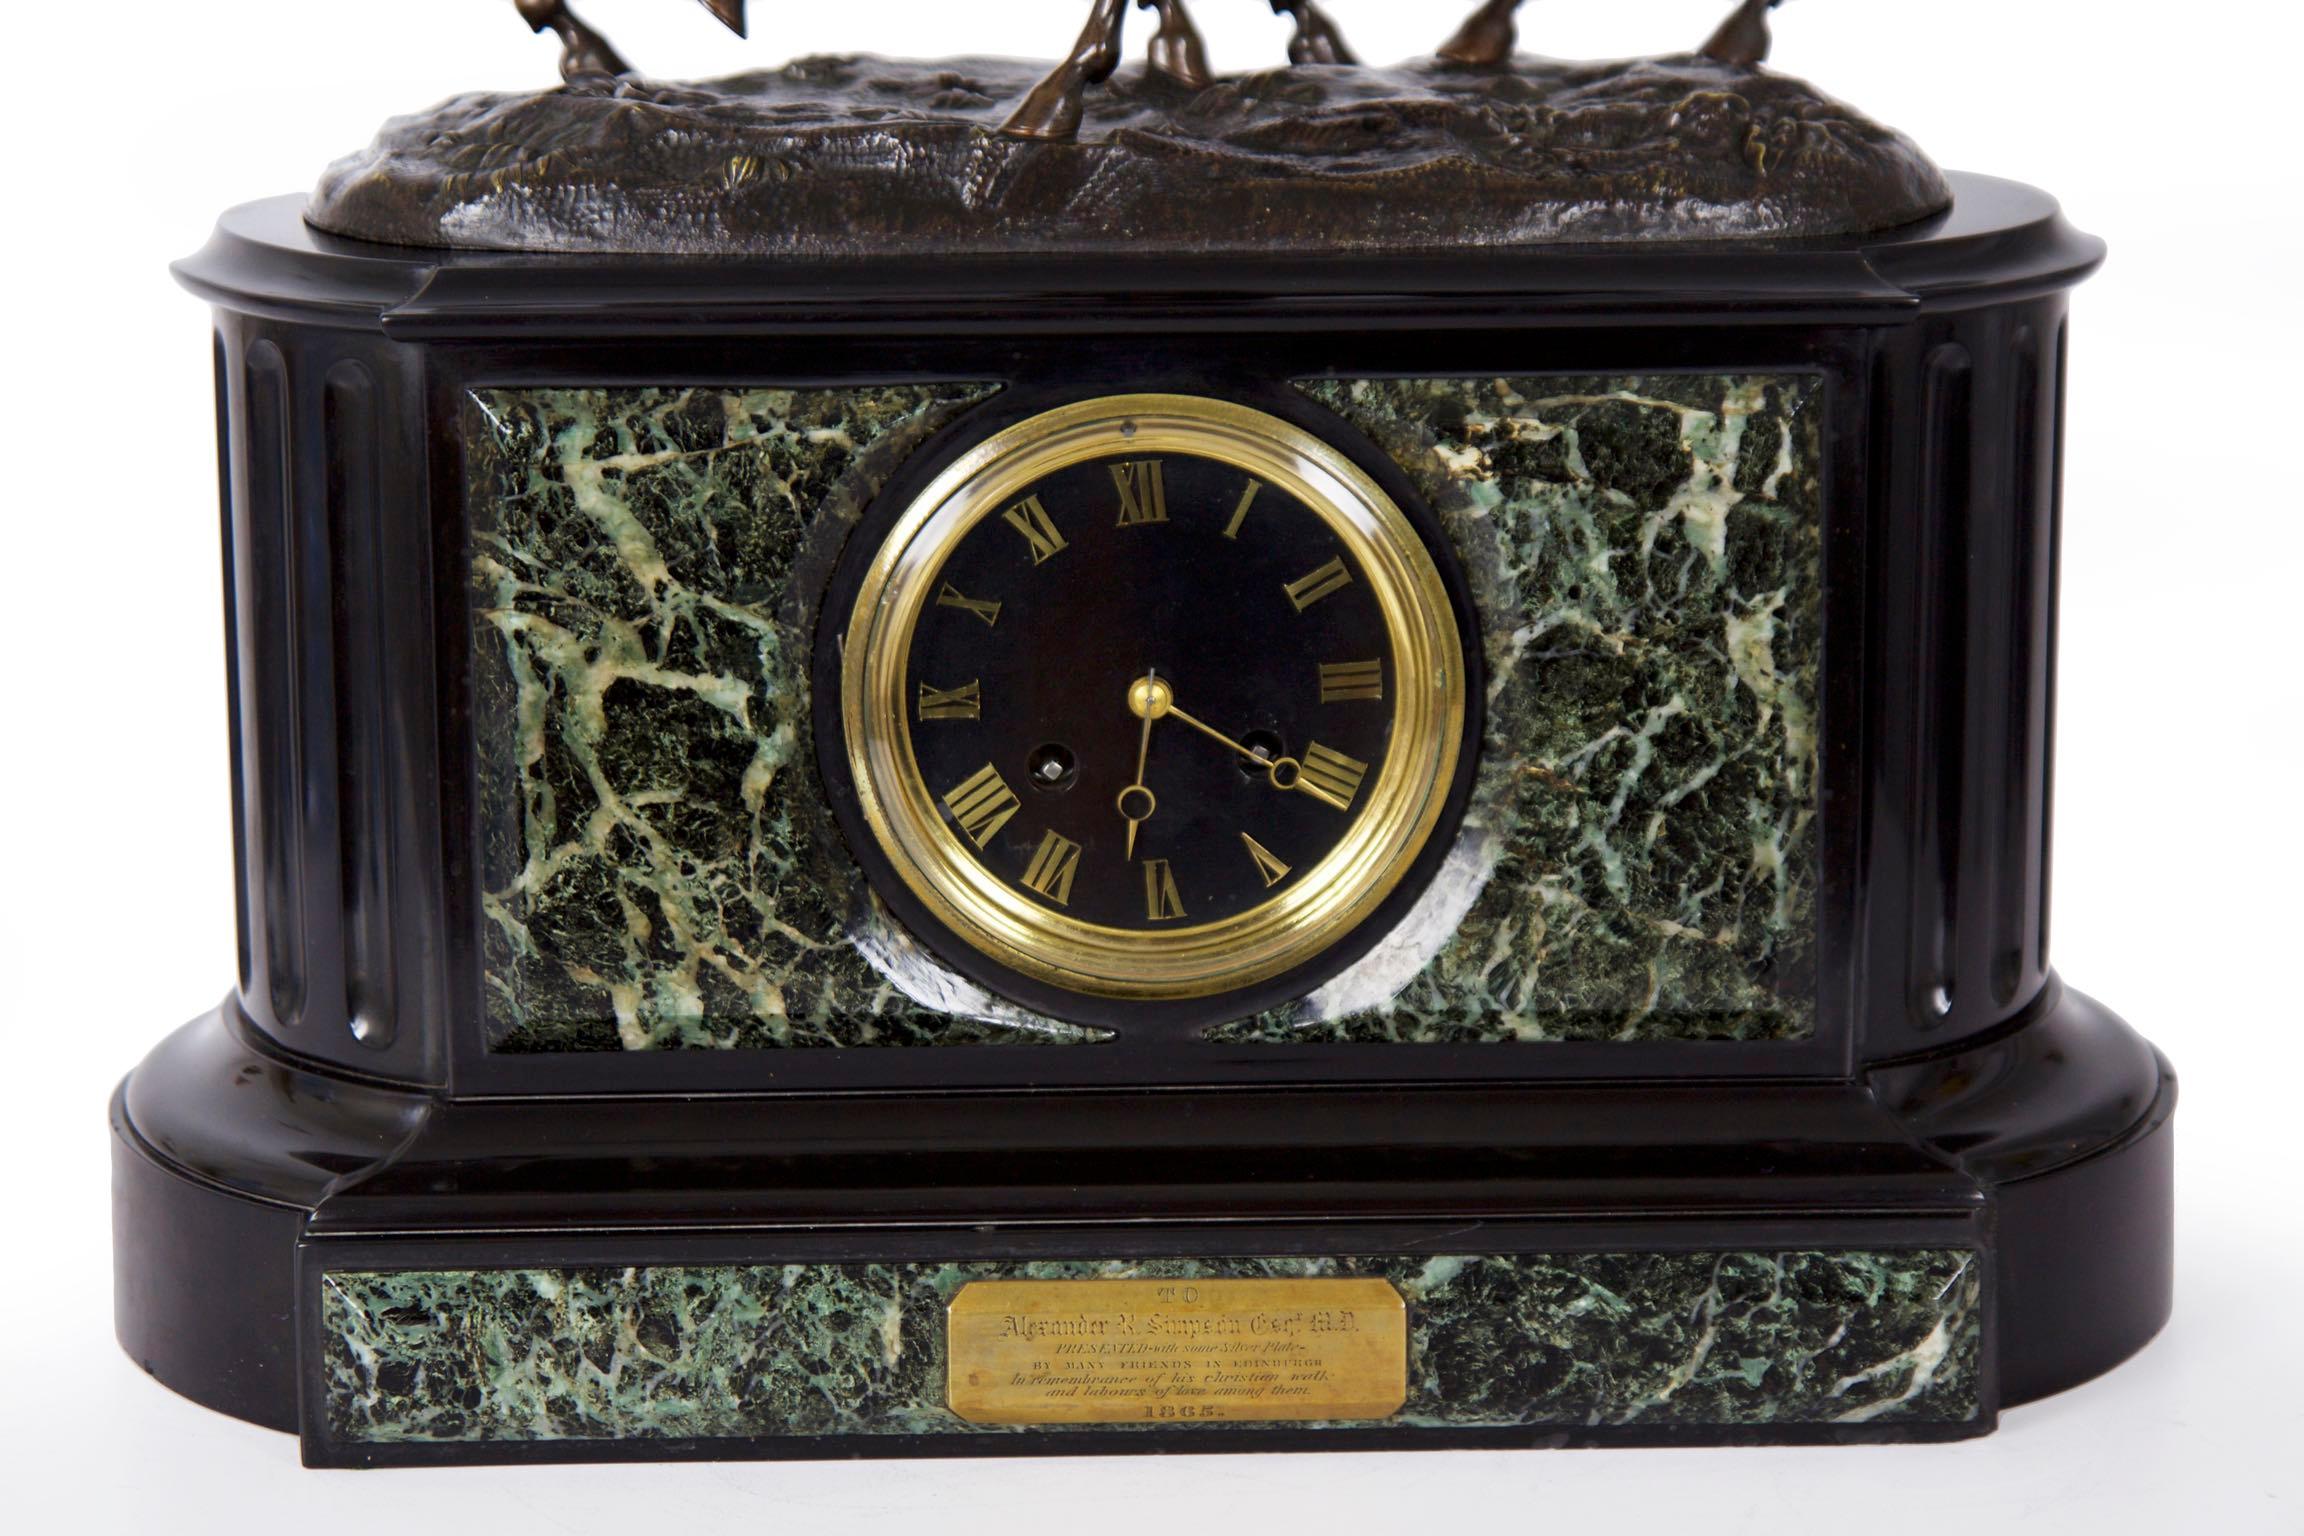 Romantic Marble and Black Slate Mantel Clock with Equestrian Sculpture Group, circa 1865